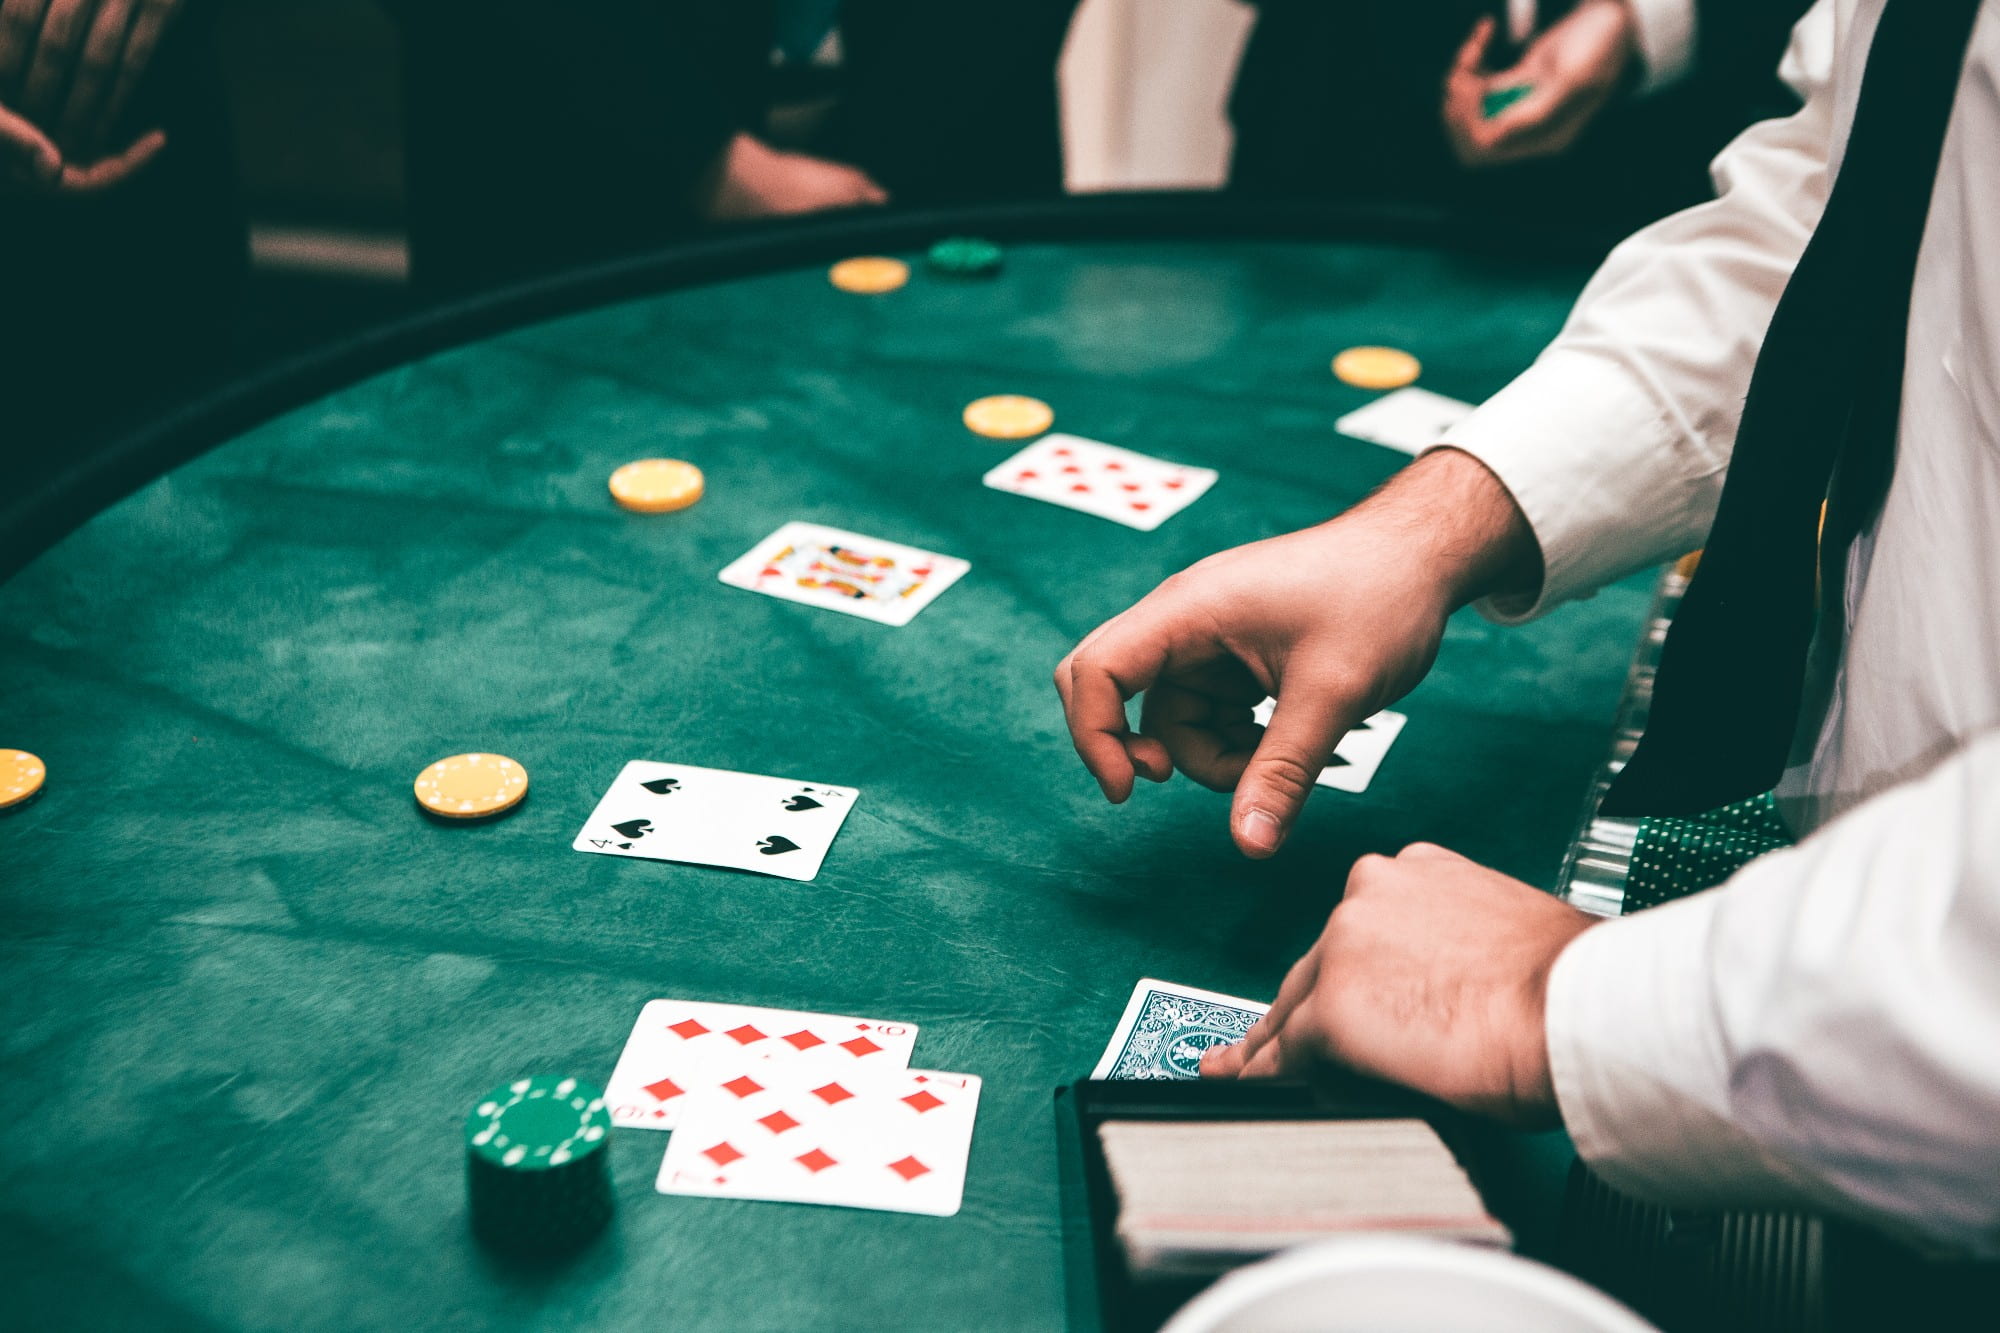 How To Minimize The Risk Of Addiction To Online Casinos